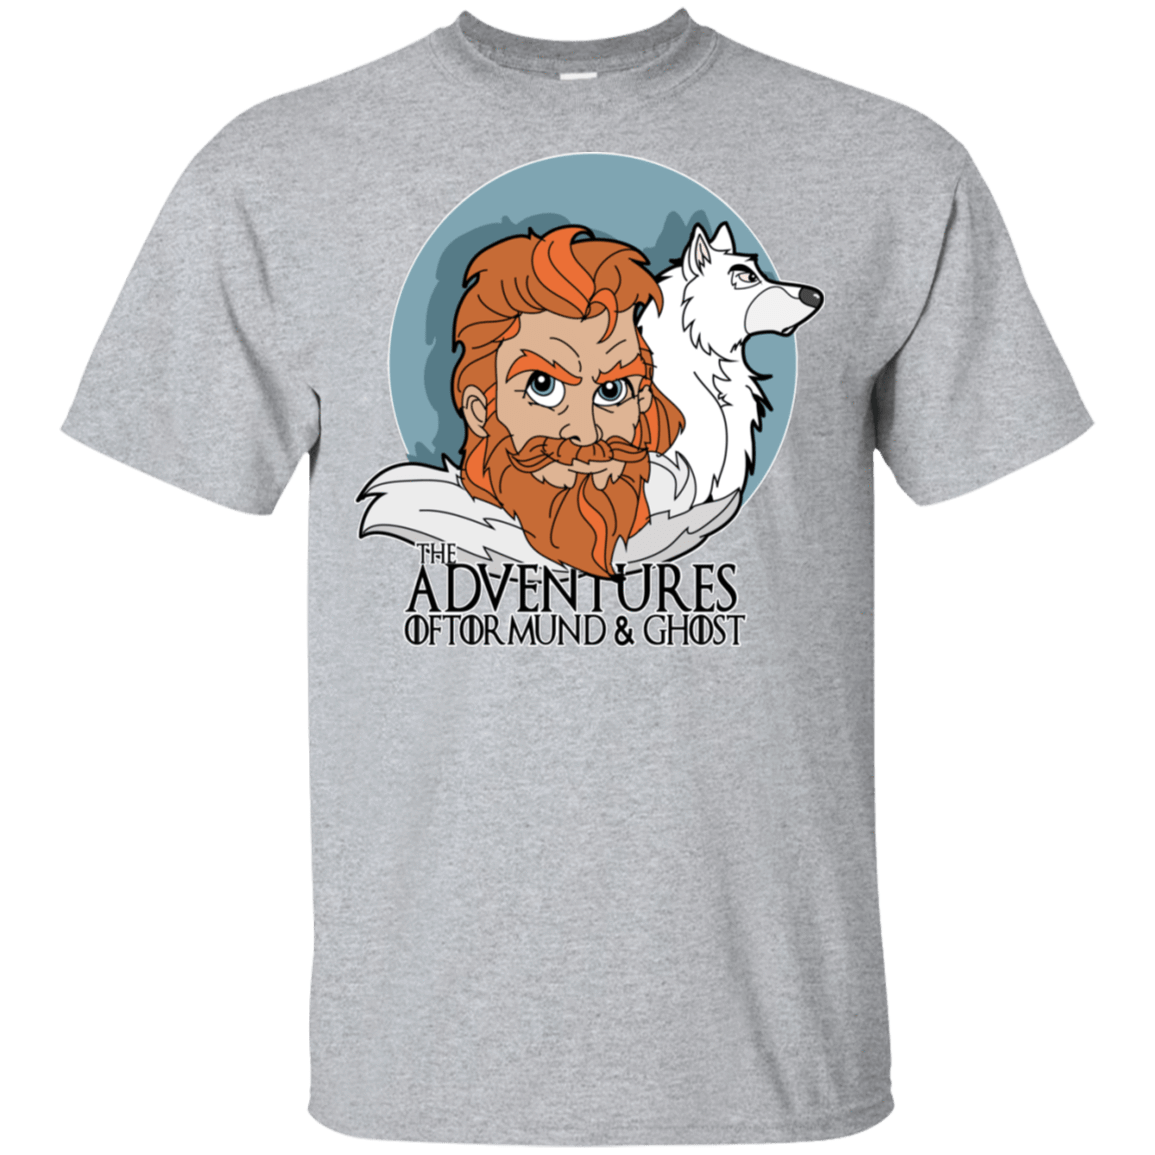 T-Shirts Sport Grey / S The Adventures of Tormund and Ghost T-Shirt